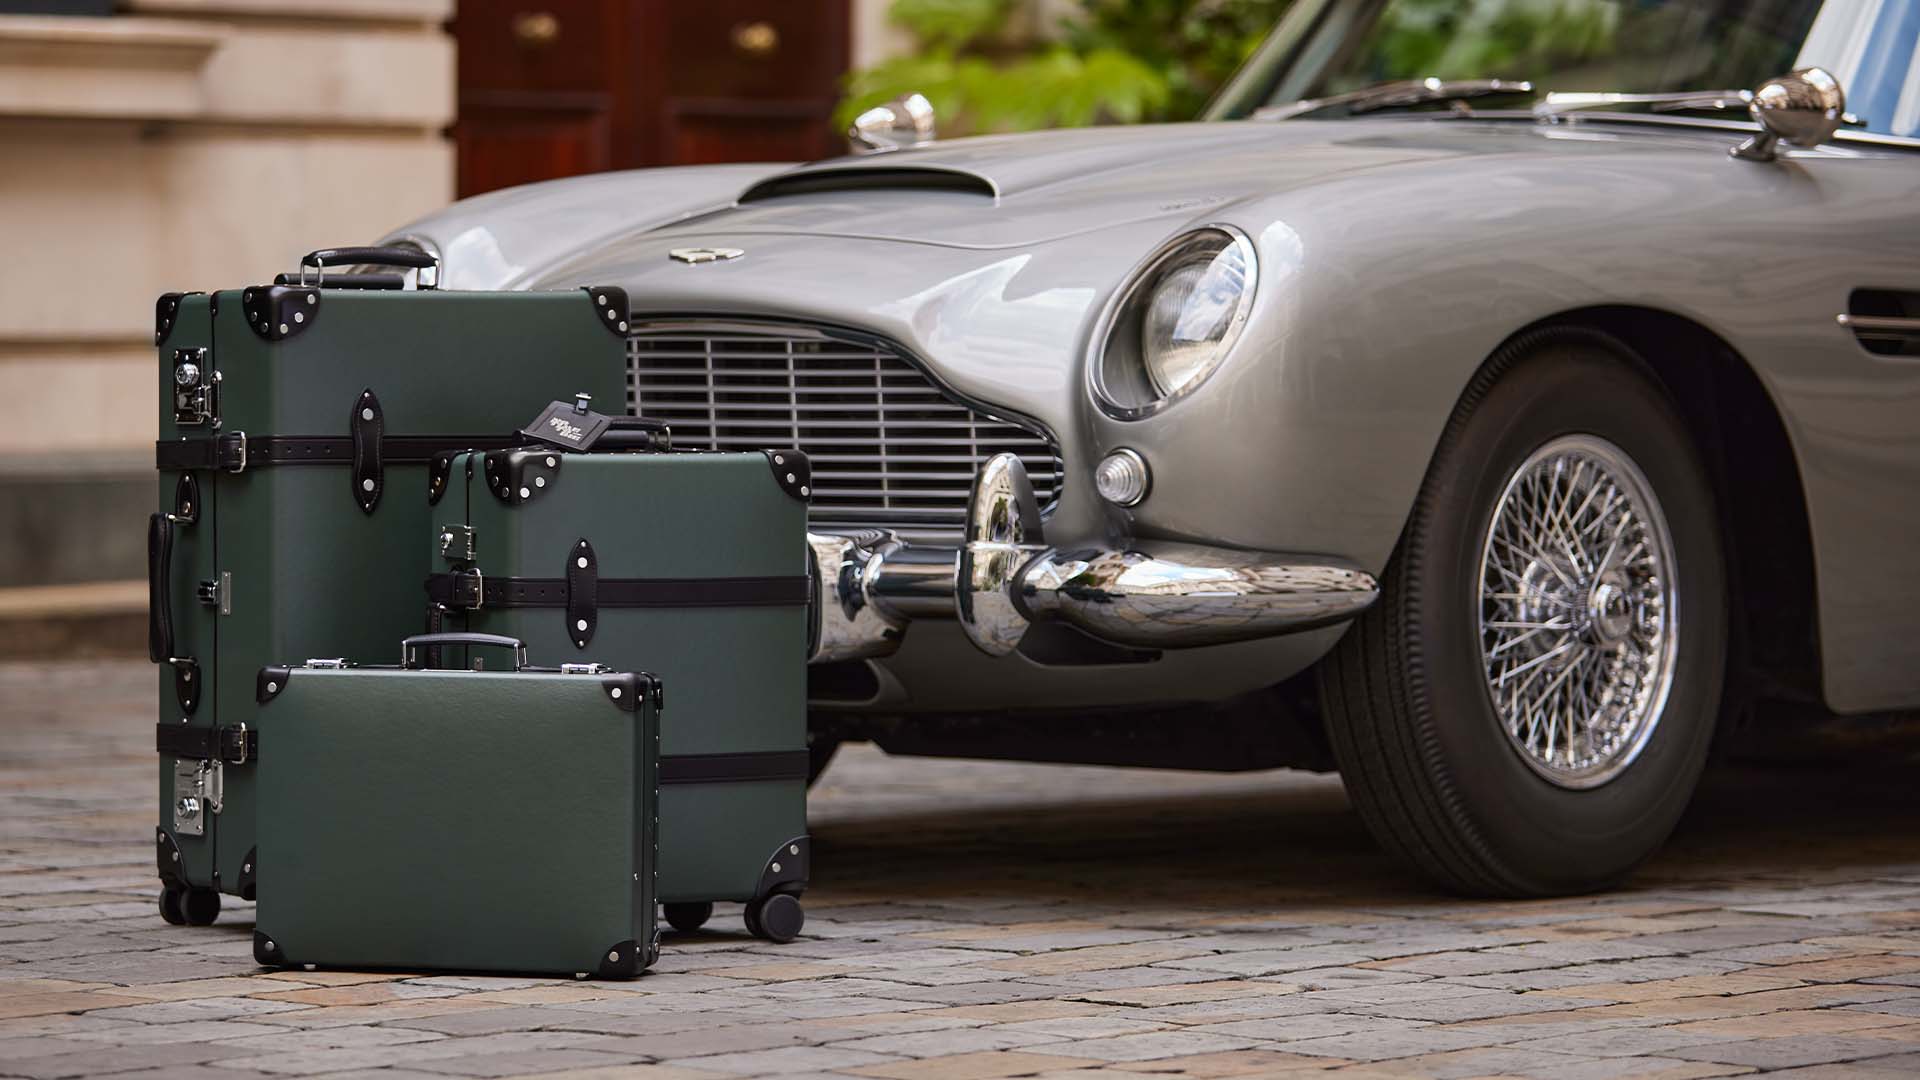 NO TIME TO DIE: The Official Luggage of James Bond - GLOBE-TROTTER